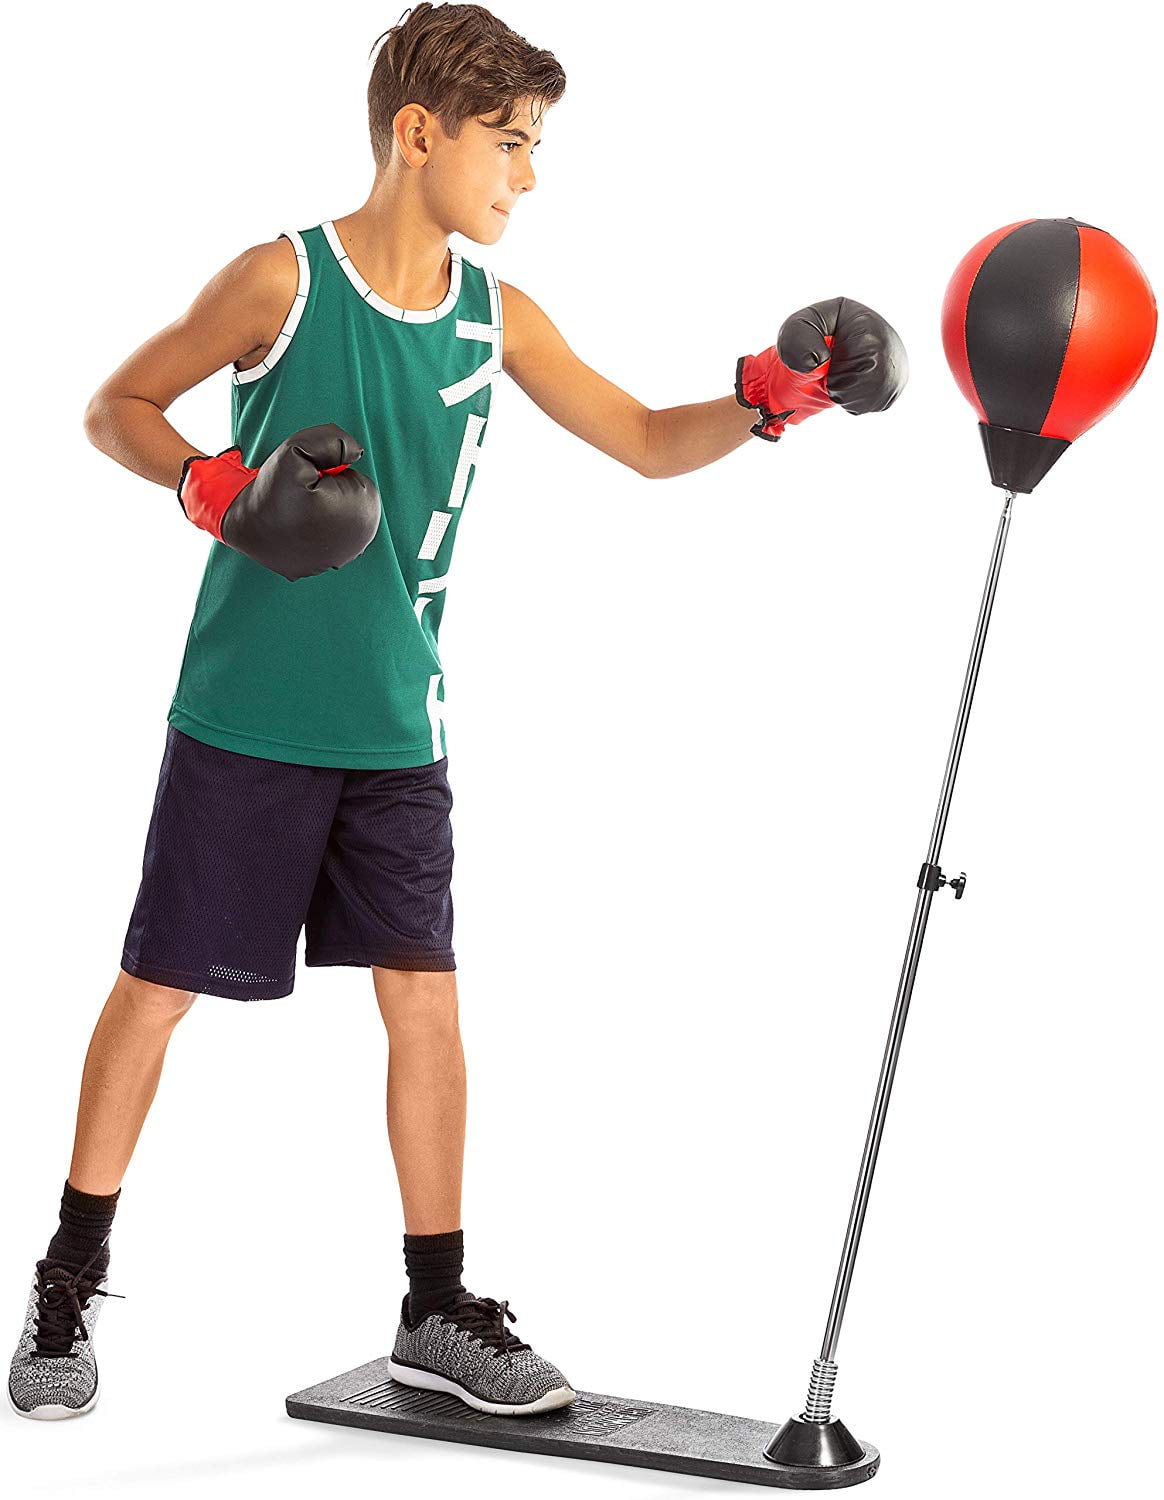 Wallfire Sports Boxing Punching Set for Kids Adjustable Height Children Punching Ball Bag Speed Boxing Sports Set Fighting Game With Gloves & Pump 